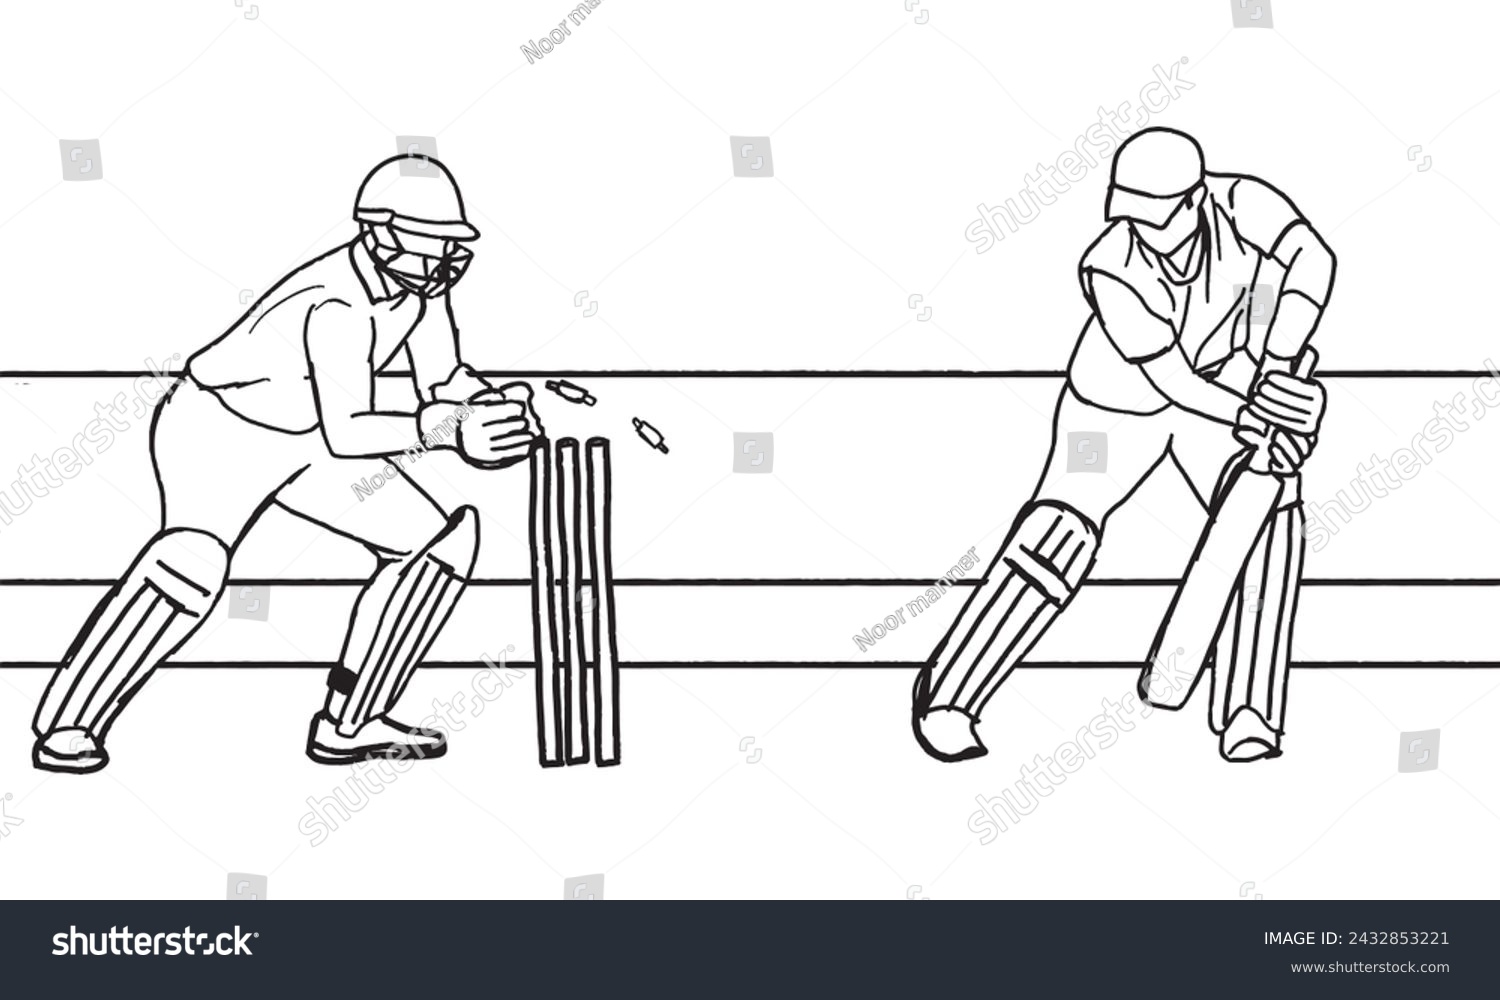 SVG of Outline cricket scene, players wicket keeper and batsmen in action pose svg